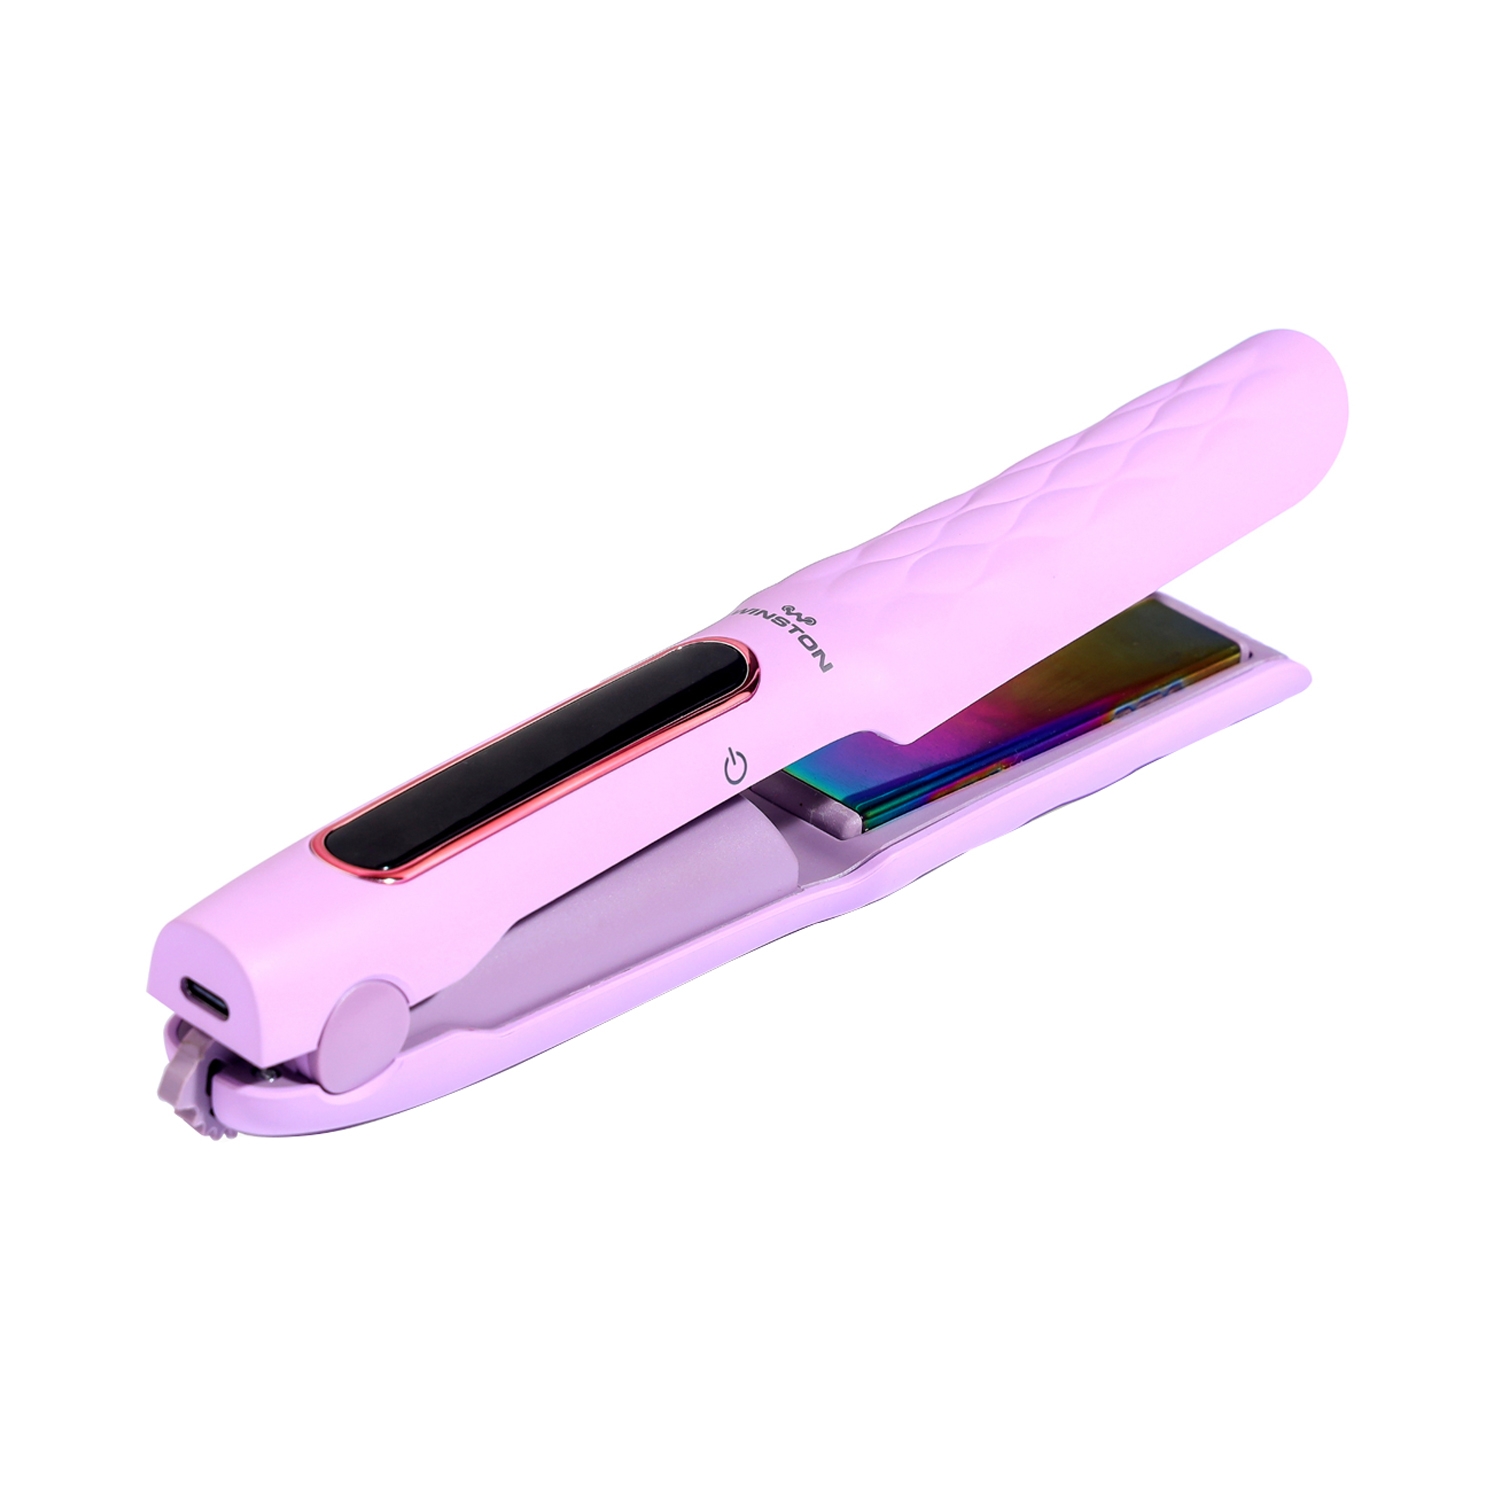 WINSTON | WINSTON Cordless Hair Straightener and Curler with Titanium Plate - Lavender (1Pc)